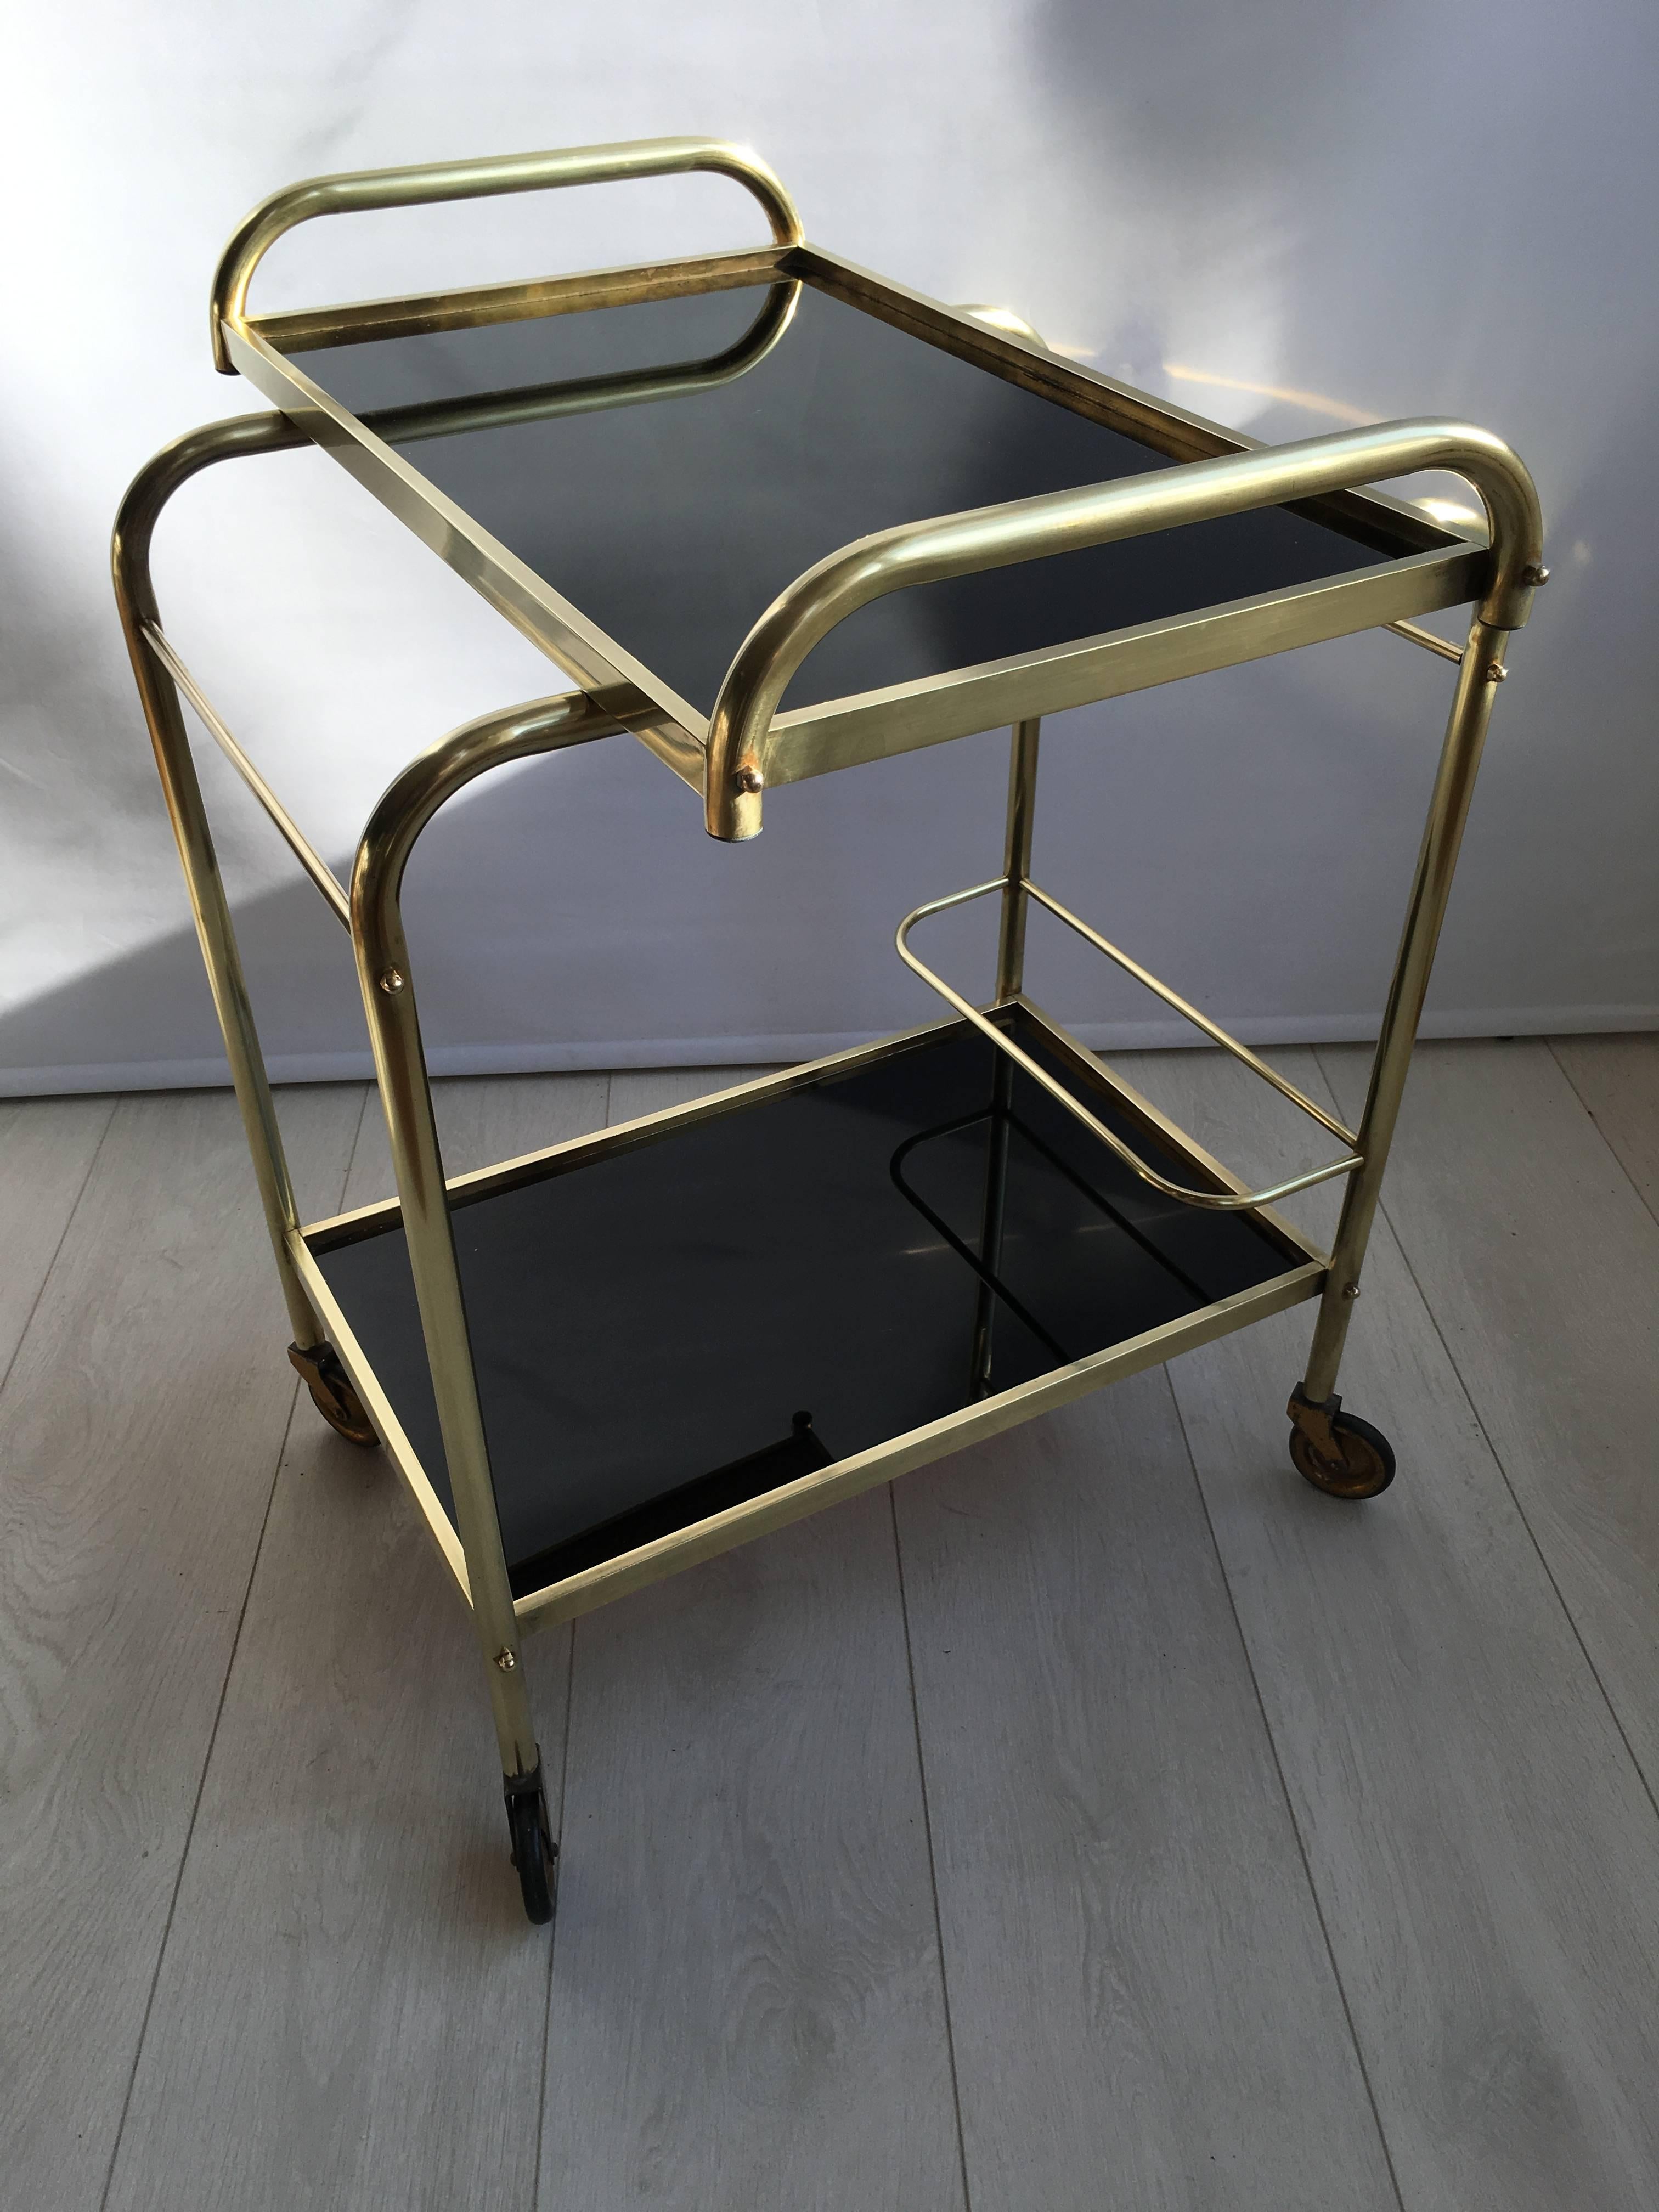 20th Century Mid-Century French Drinks Trolley or Bar Cart